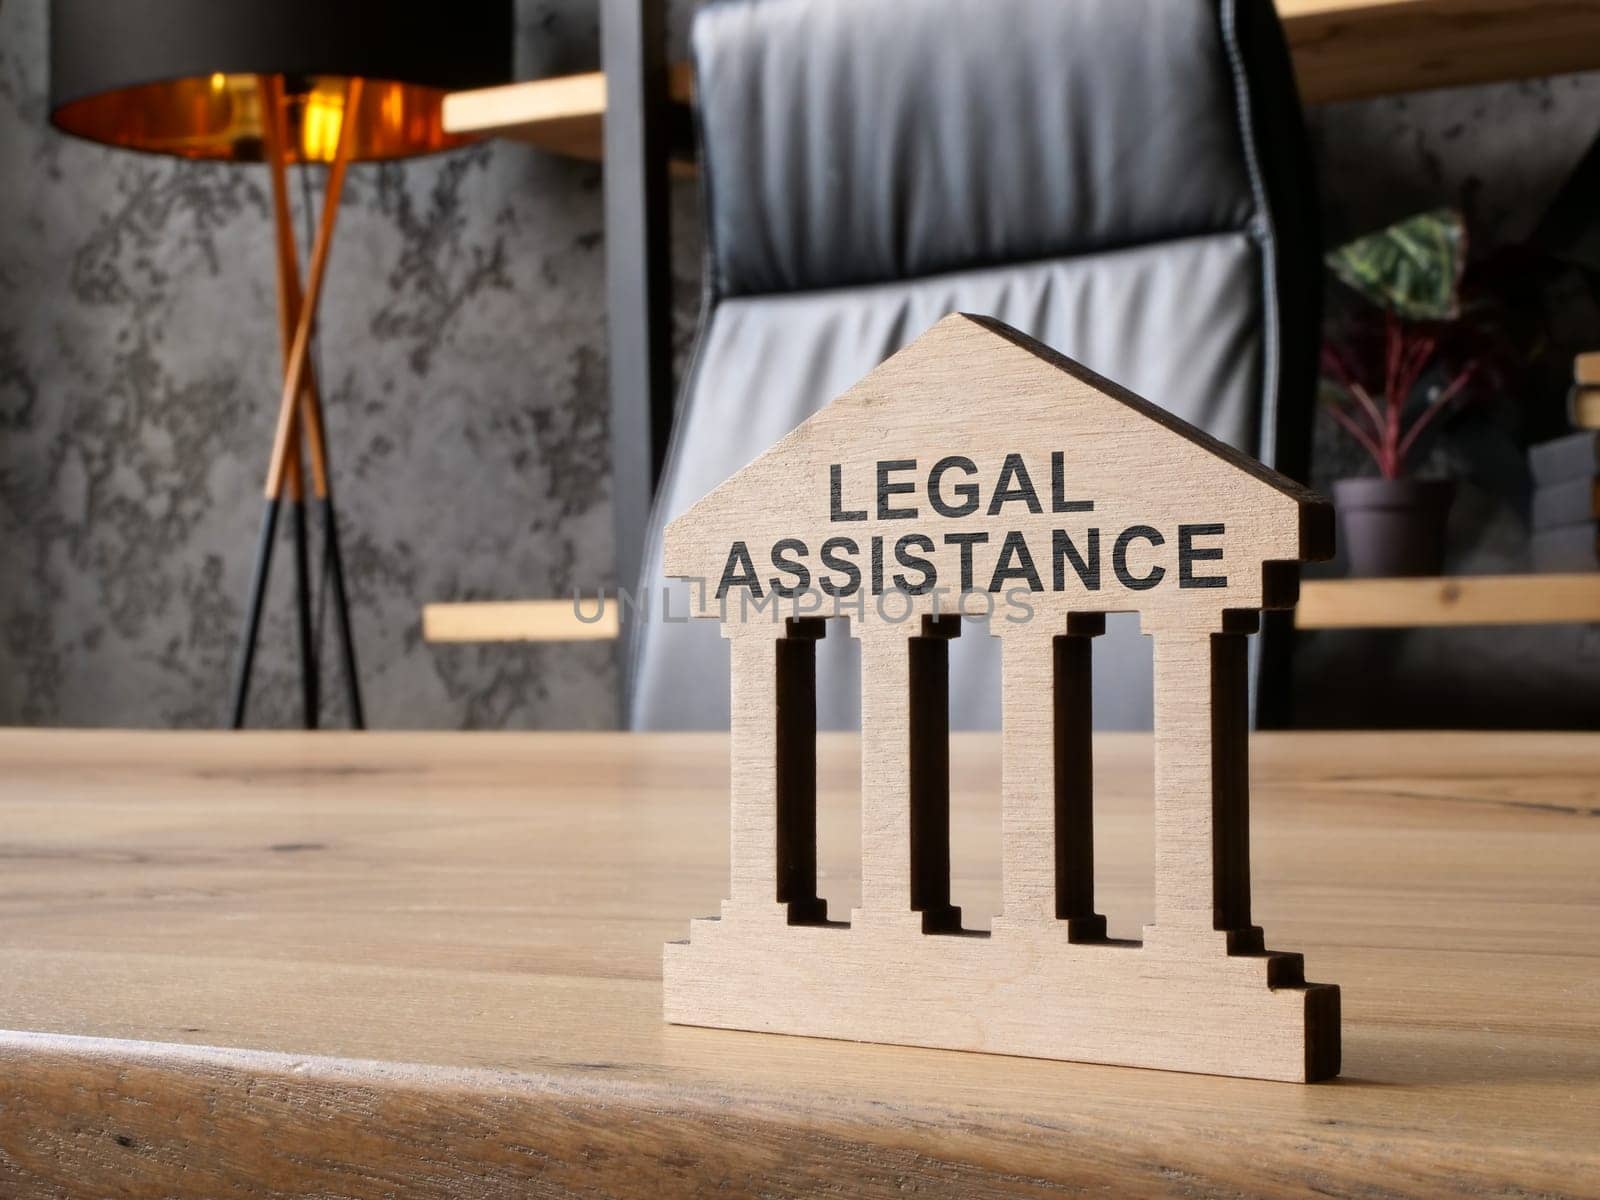 Legal assistance. The sign is on the table.